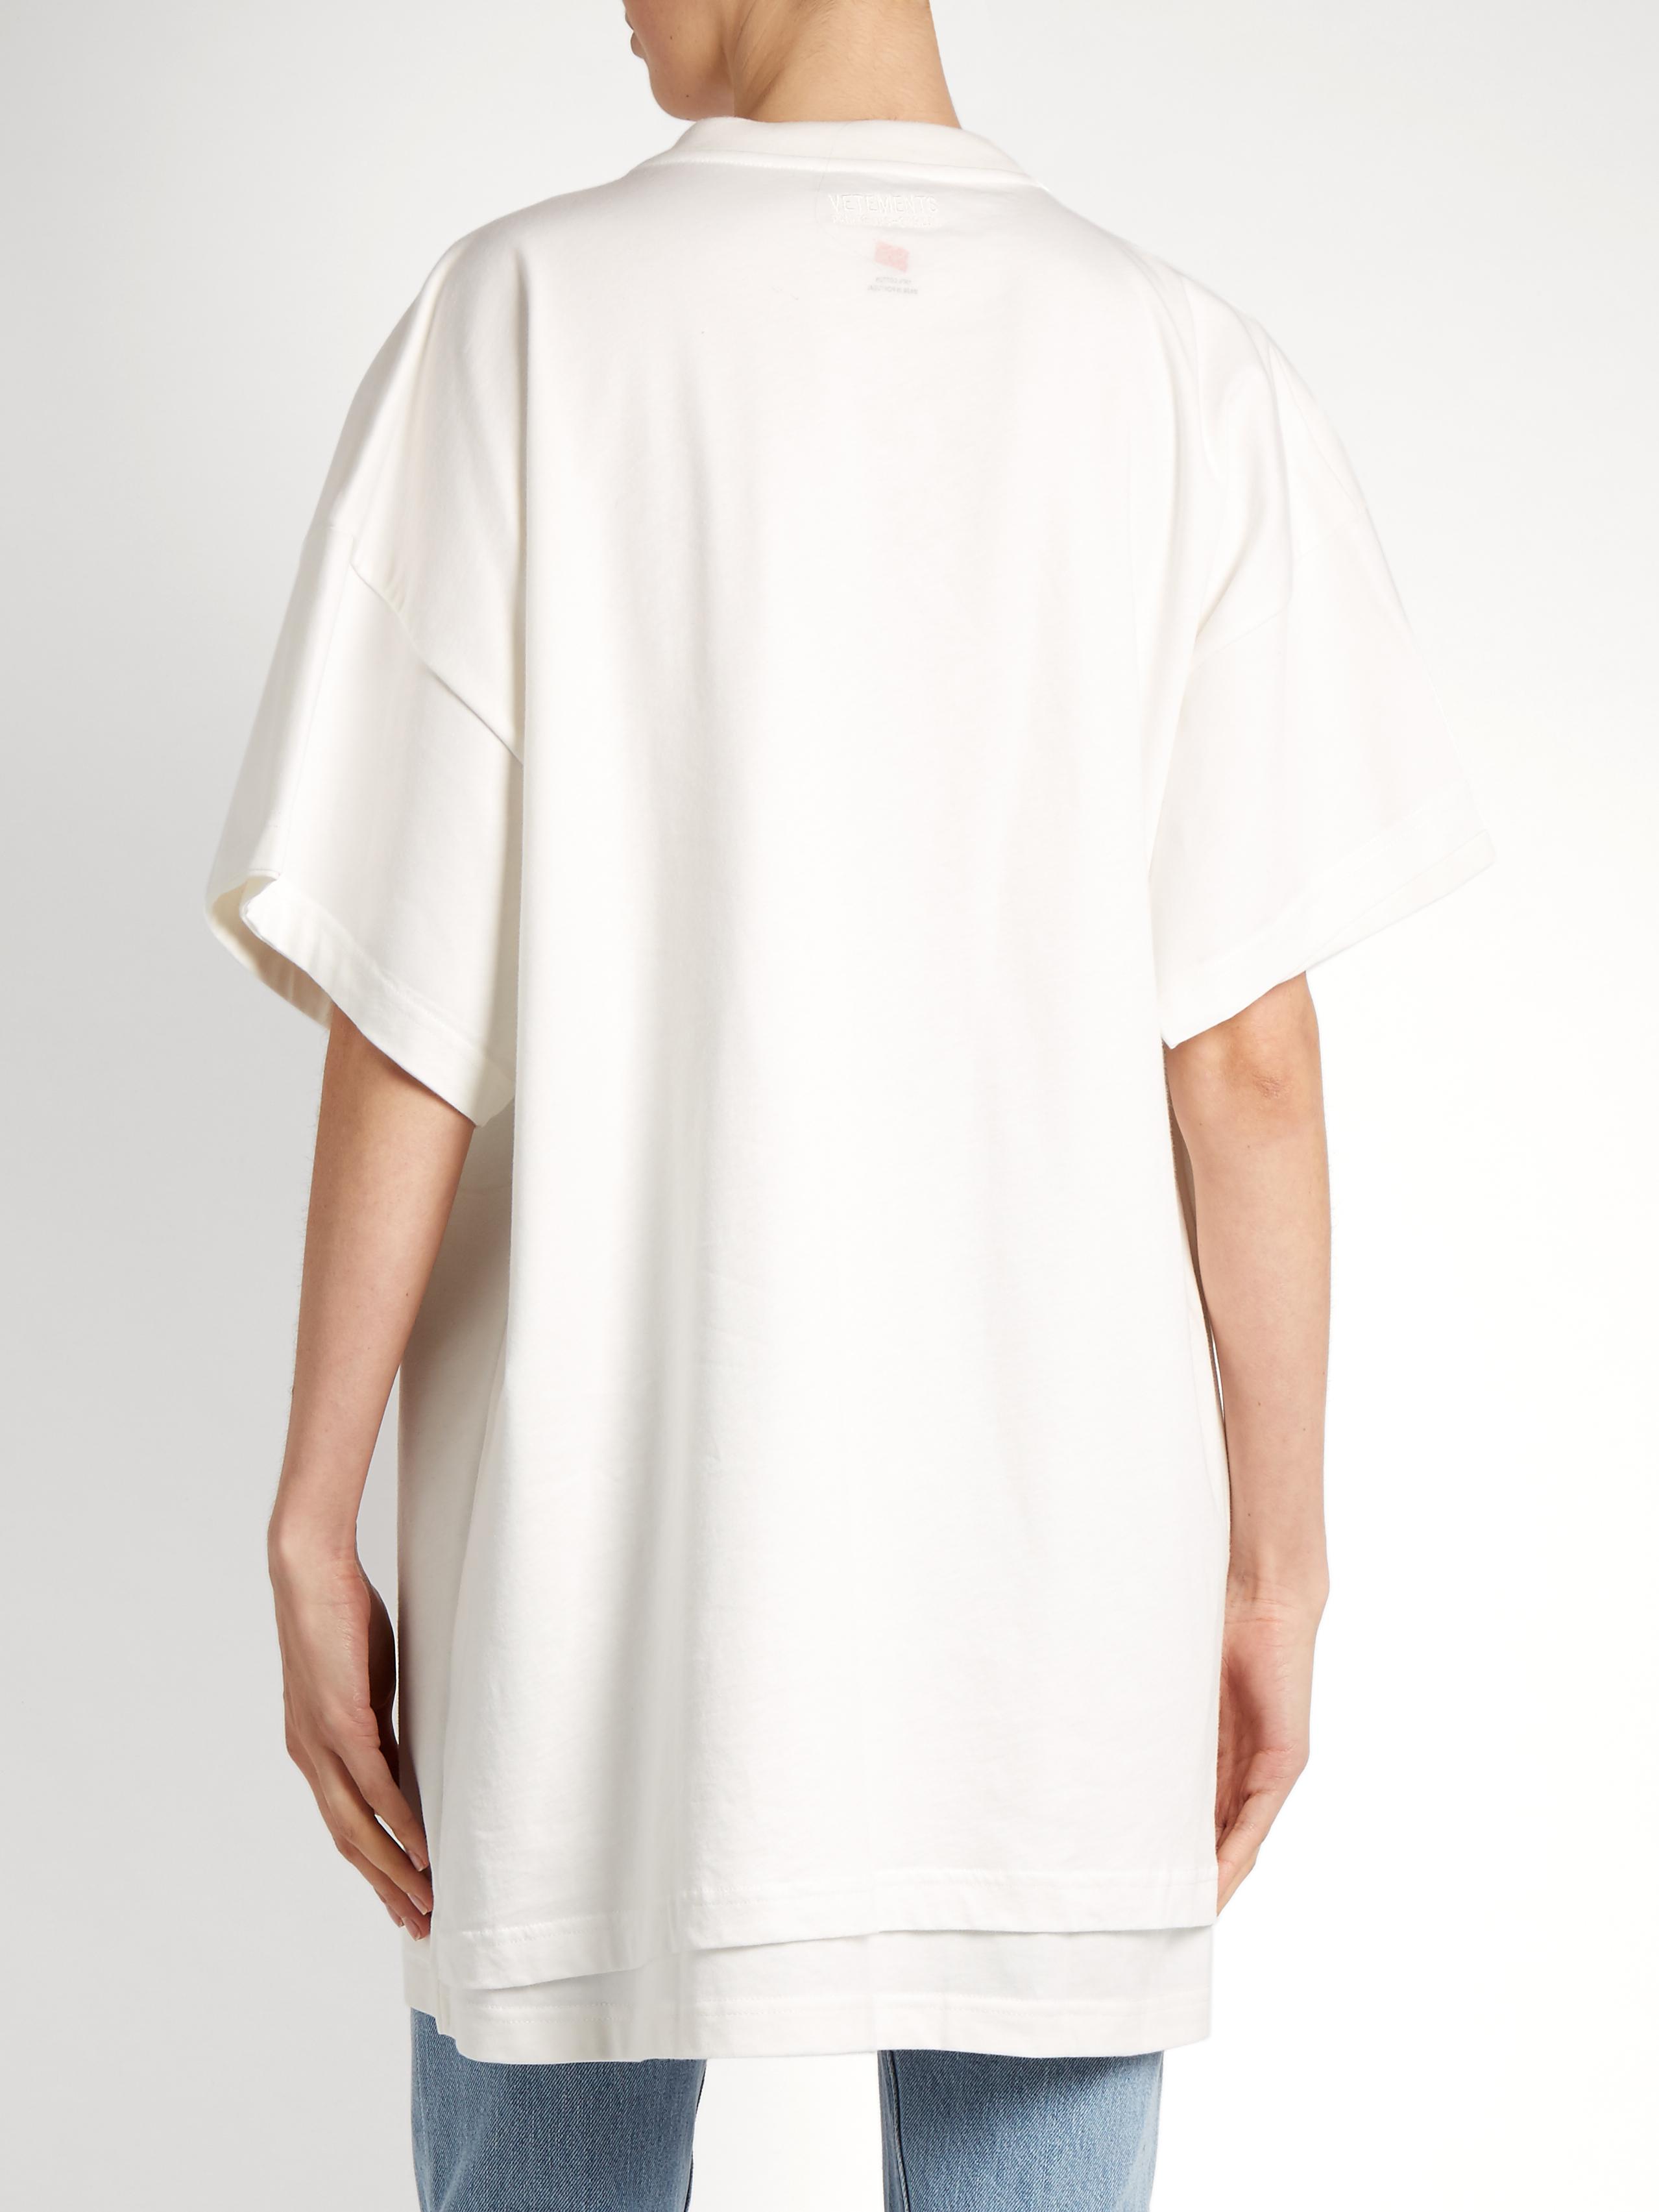 Vetements Cotton X Hanes Oversized Double-layer T-shirt in White - Lyst